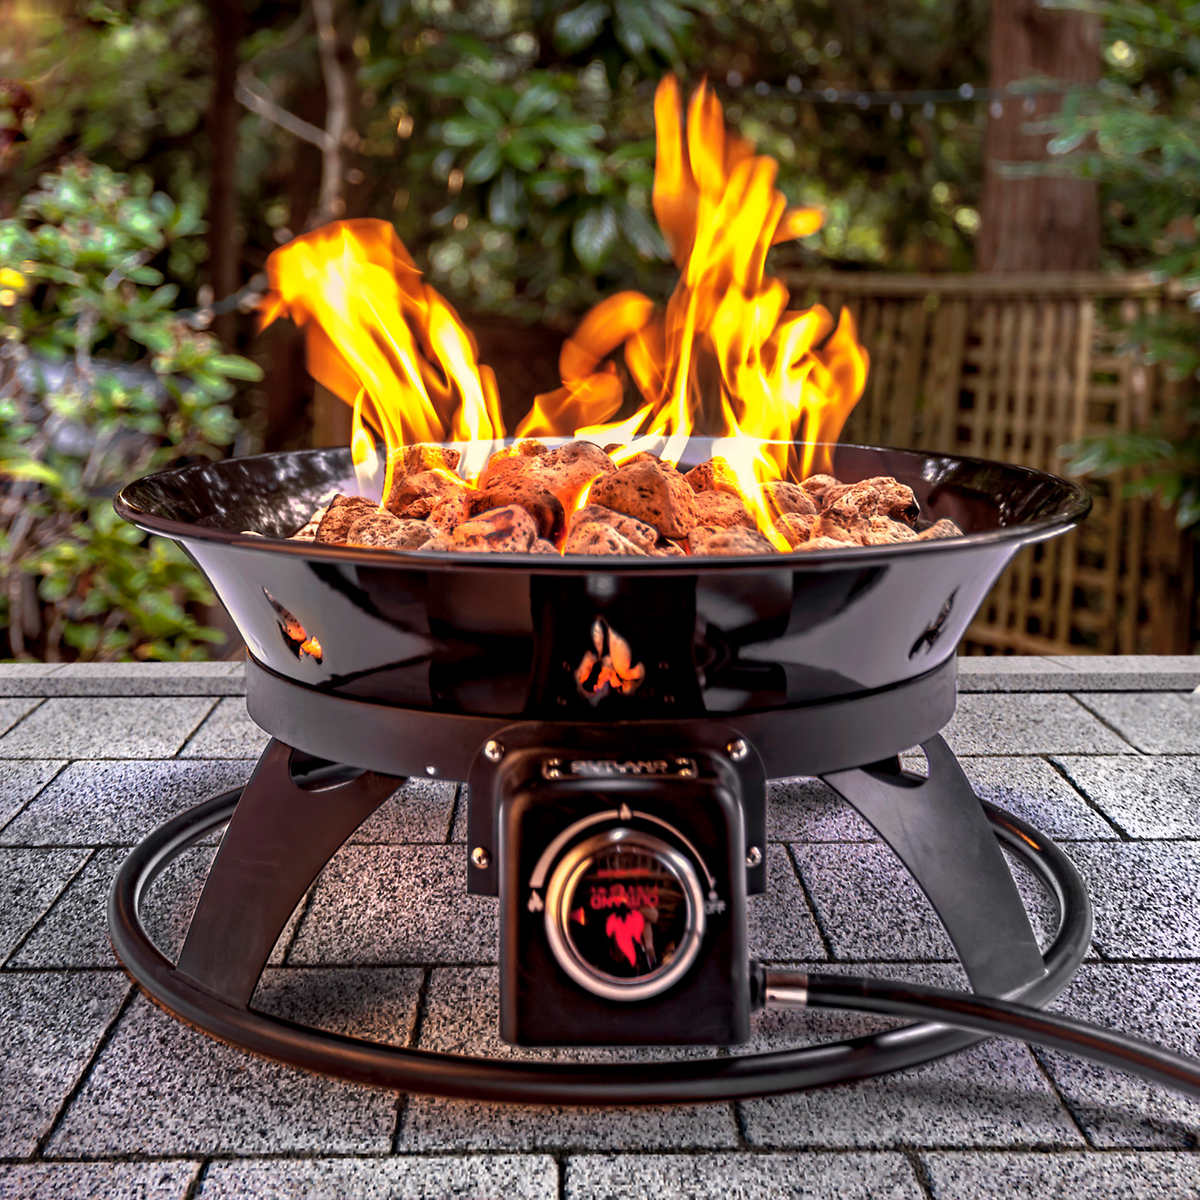 Outland Firebowl Outdoor Firepit Costco, Fire Pit Tray Kitchen